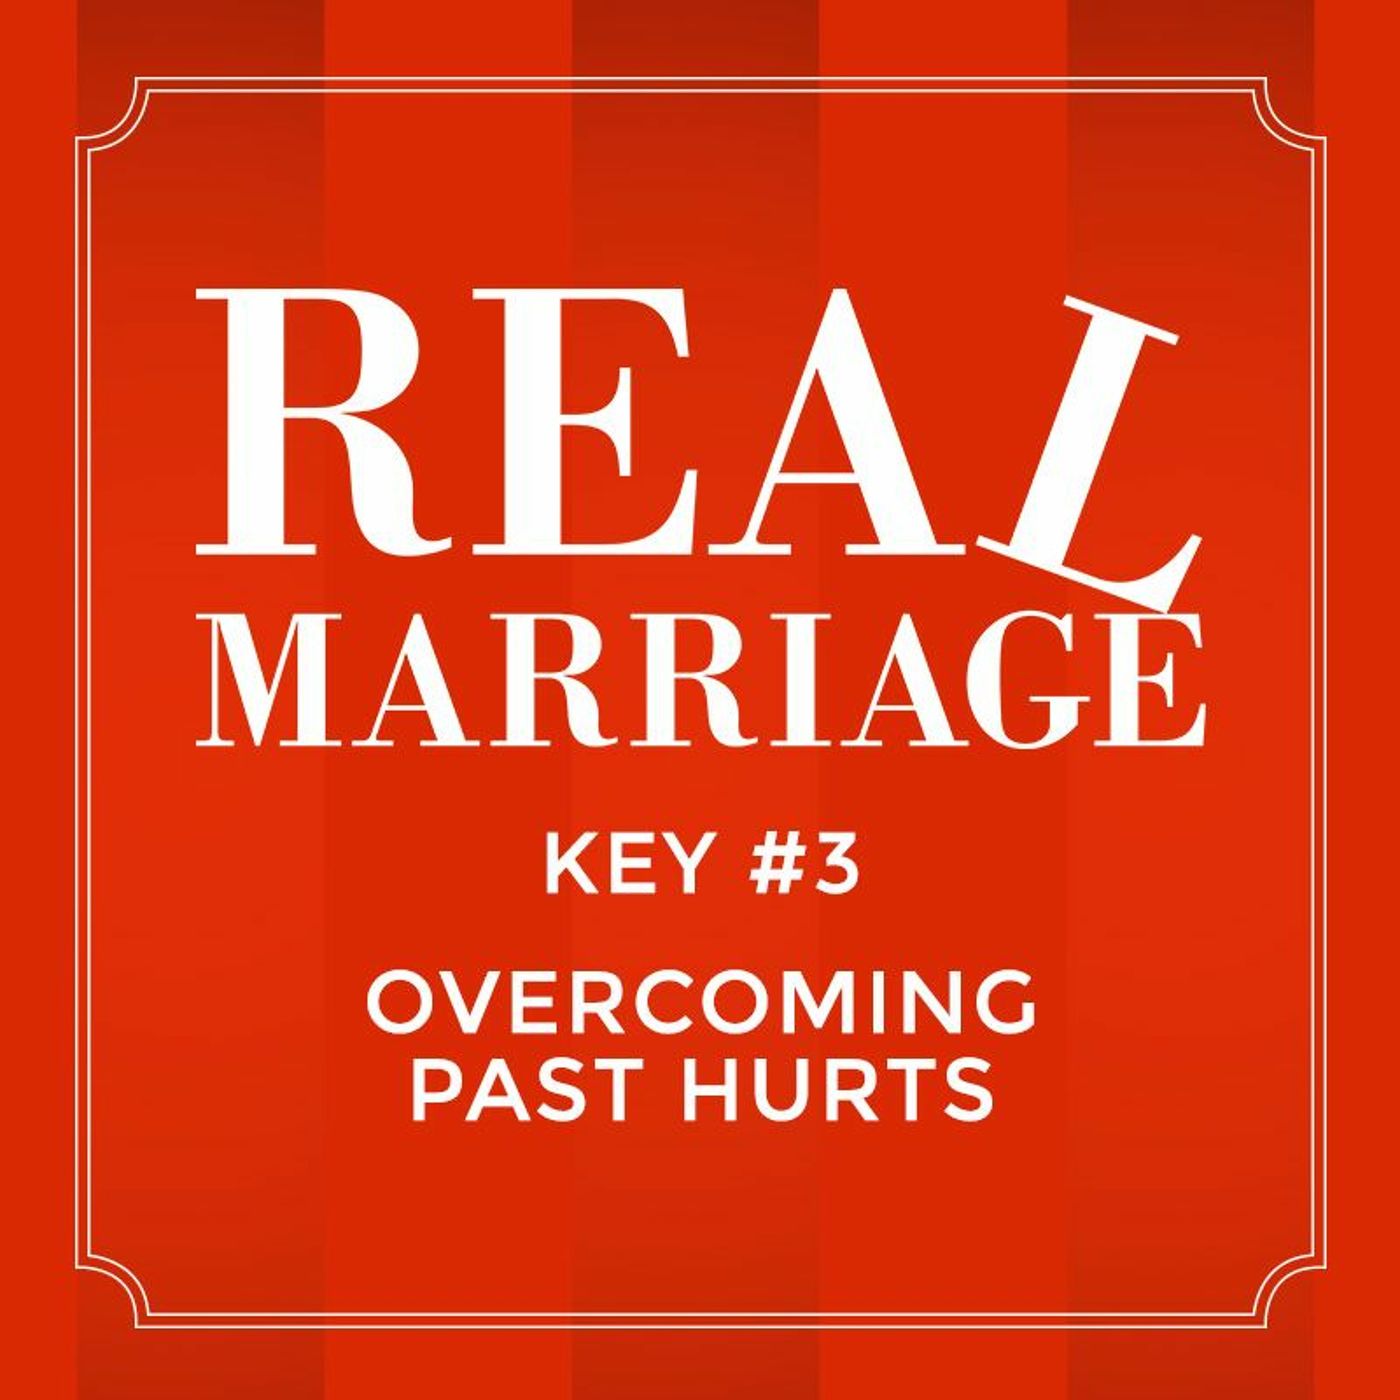 Real Marriage - Key #3 Overcoming Past Hurts